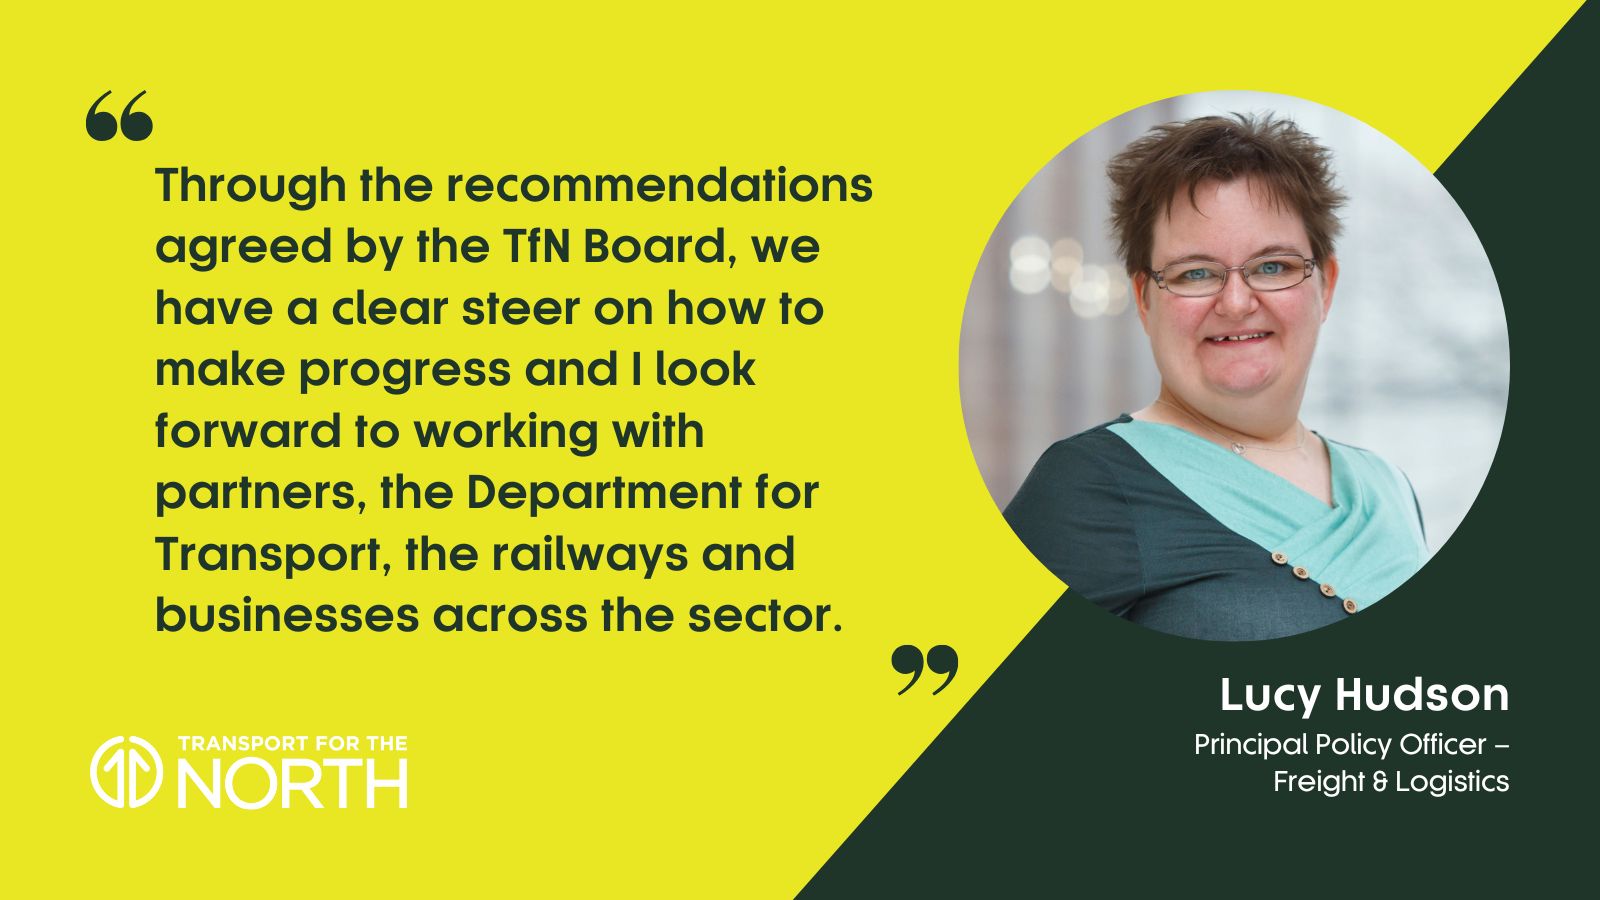 Lucy Hudson on TfN's Freight and Logistics strategy